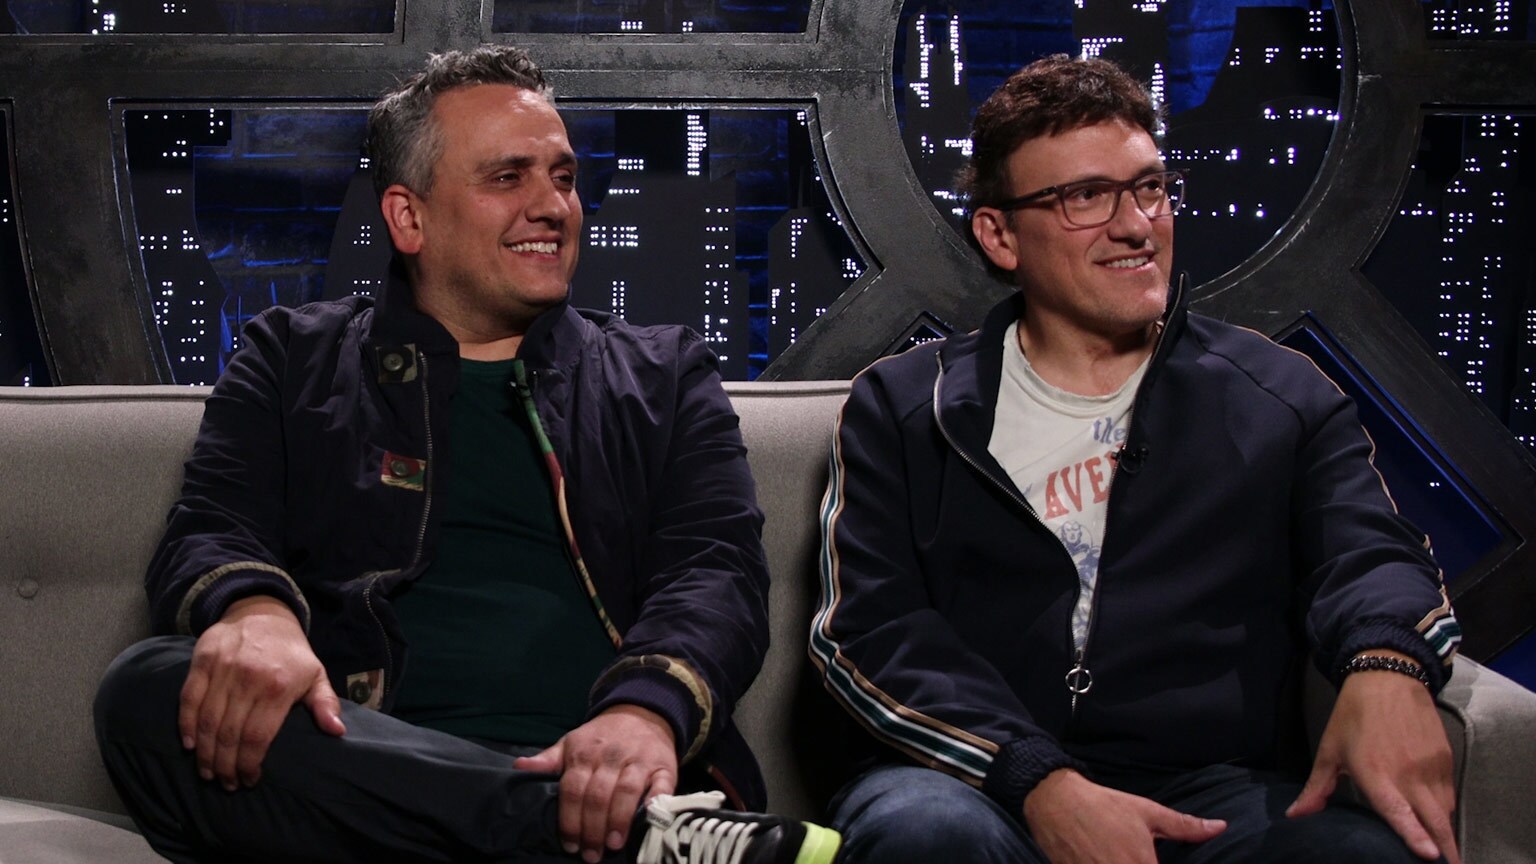 5 Questions with the Russo Brothers, Directors of Avengers: Endgame